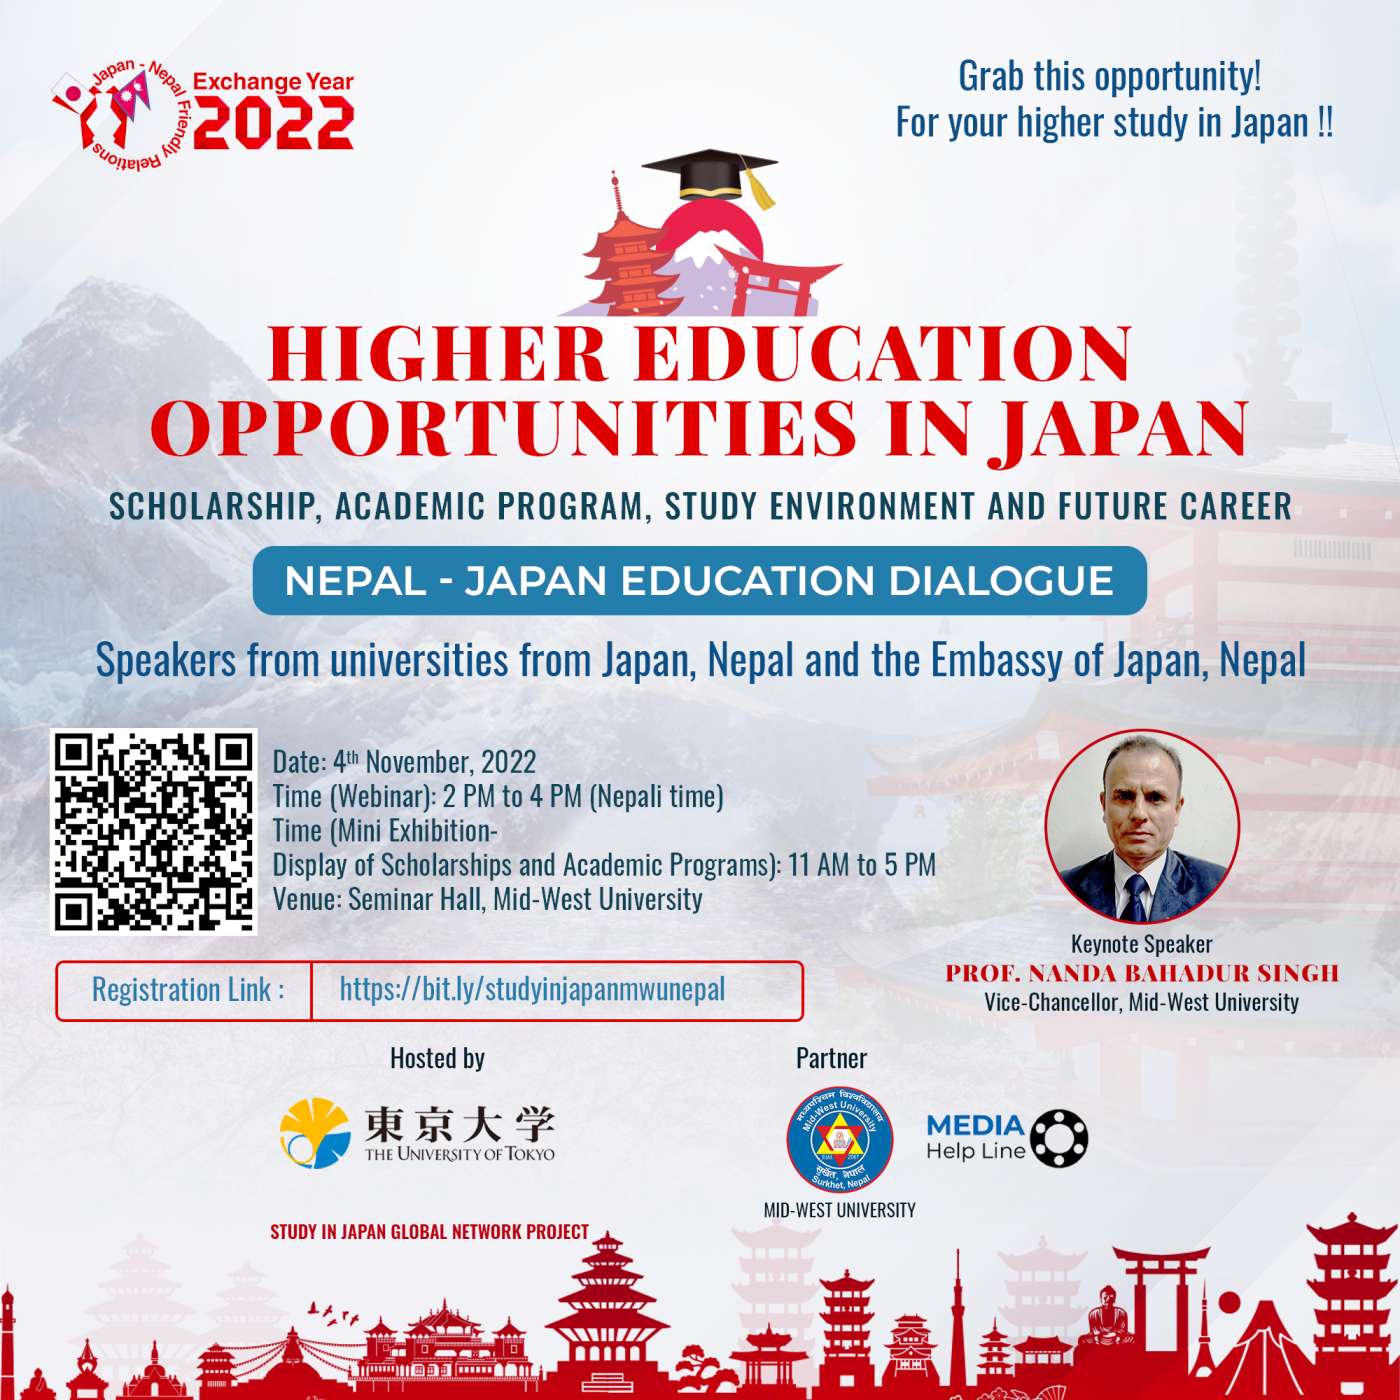 University of Tokyo to organize dialogue on – Higher Education Opportunities in Japan